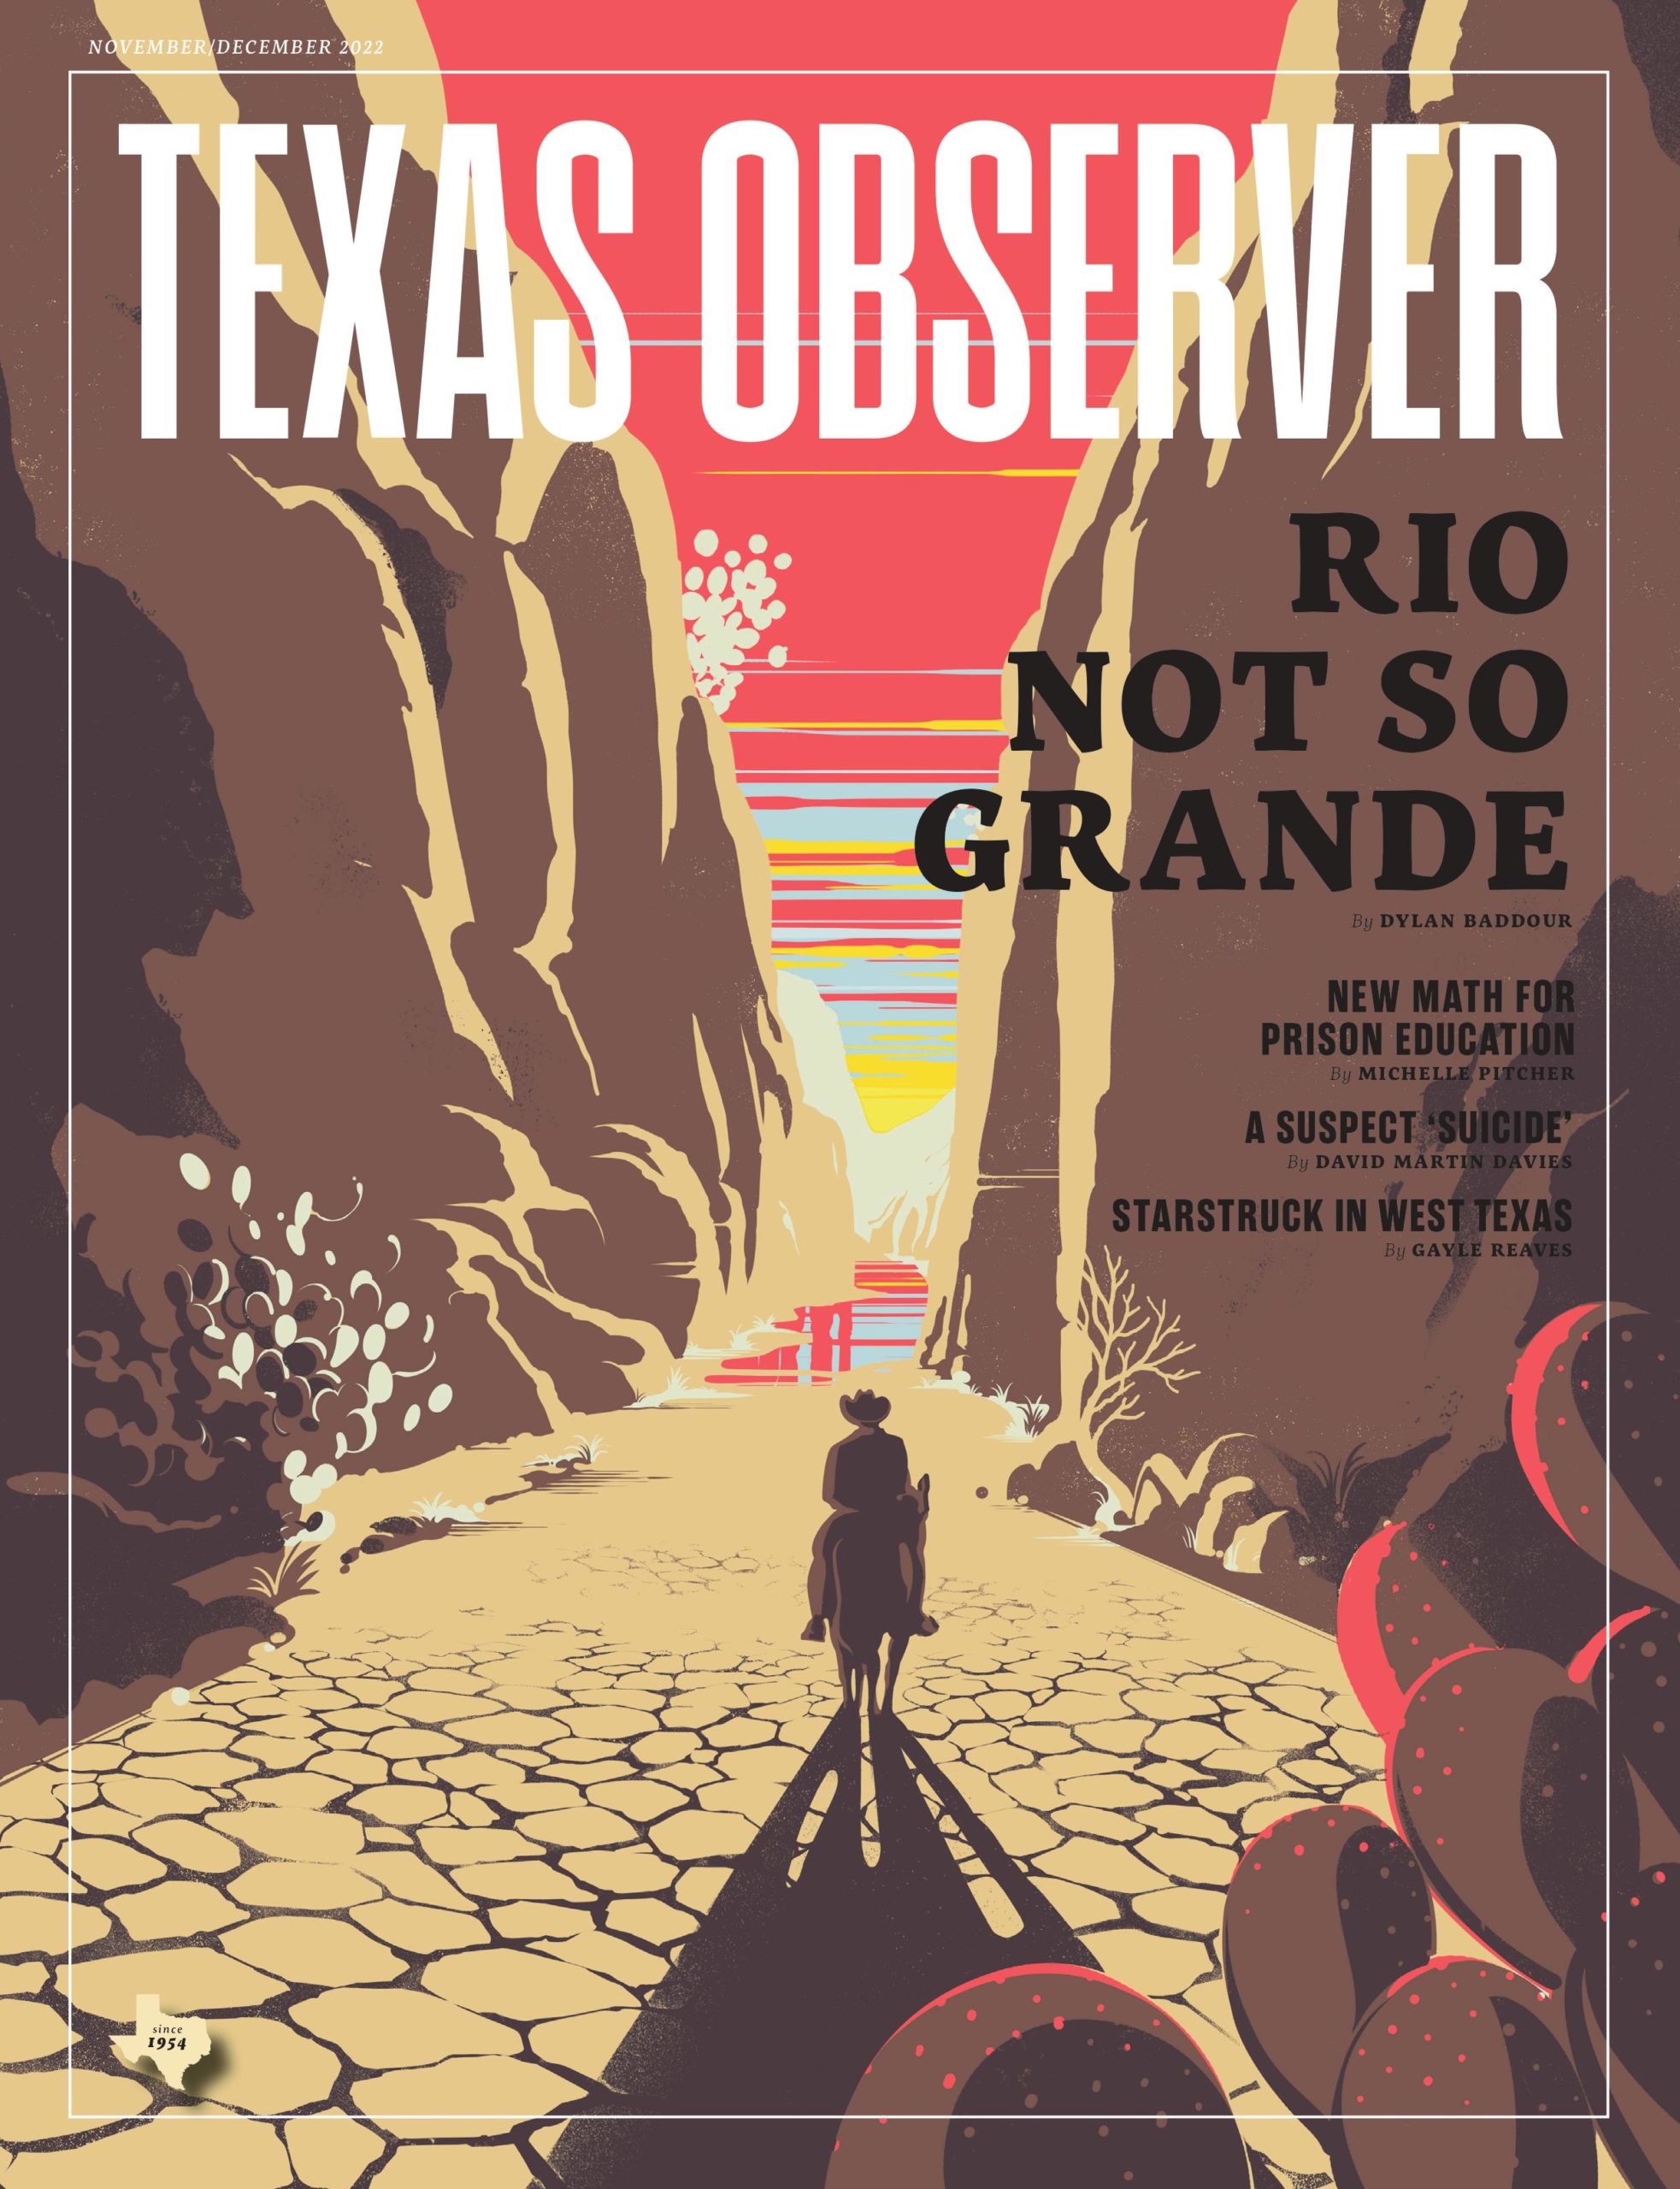 The cover of the November/December issue of the Texas Observer magazine features an illustration of a silhouetted cowboy riding a horse down the dry gorge which where the Rio Grande once flowed. Prickly pears and other succulents line the tall rocky walls as the cowboy rides into the sunset. The main headline is "Rio Not So Grande" by Dylan Baddour.